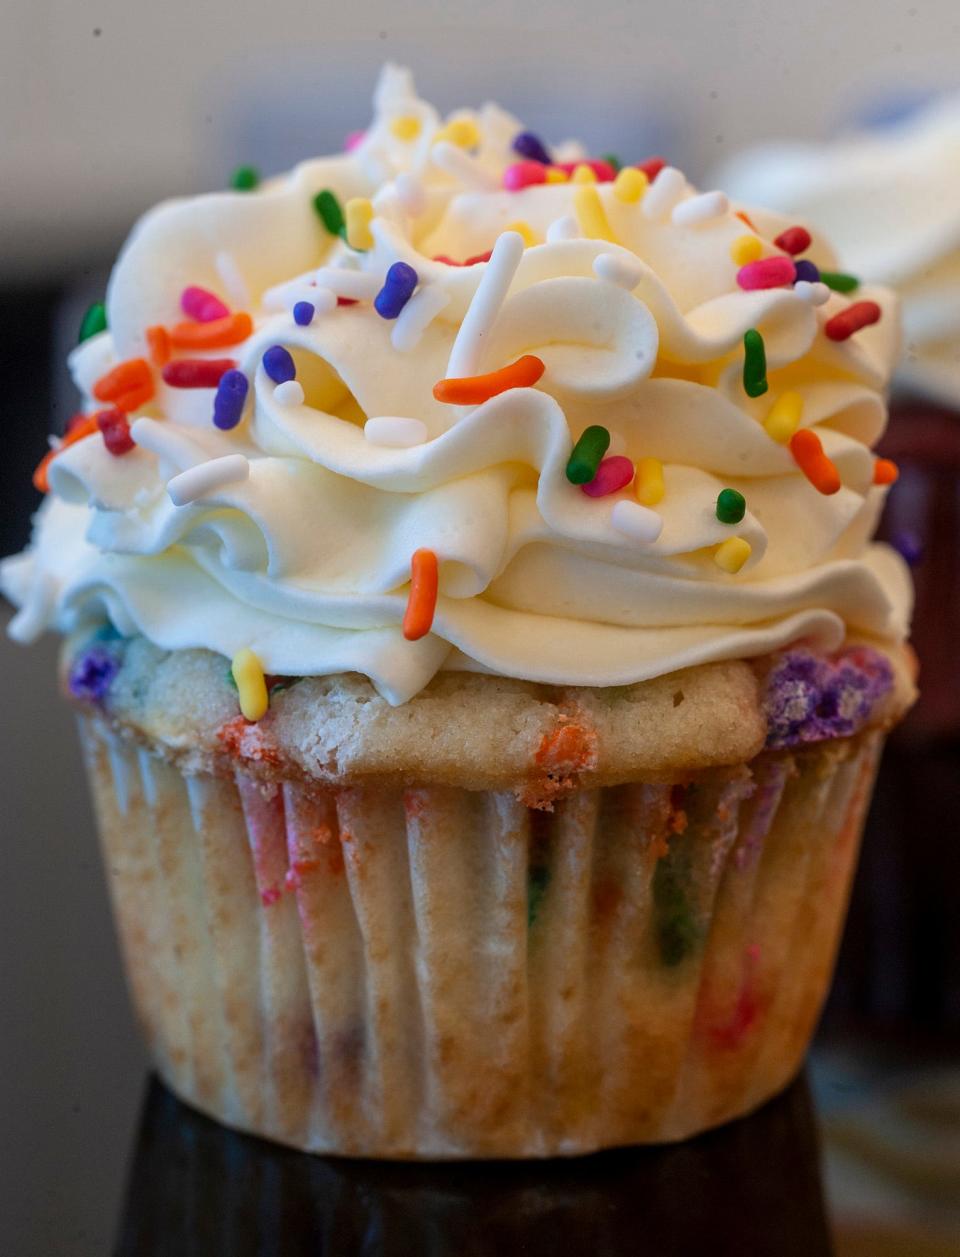 At Maine Girl Cupcakes in Natick,  a "funfetti" cupcake: a vanilla cupcake baked with rainbow sprinkles, topped with vanilla buttercream and rainbow sprinkles, Dec. 14, 2022.